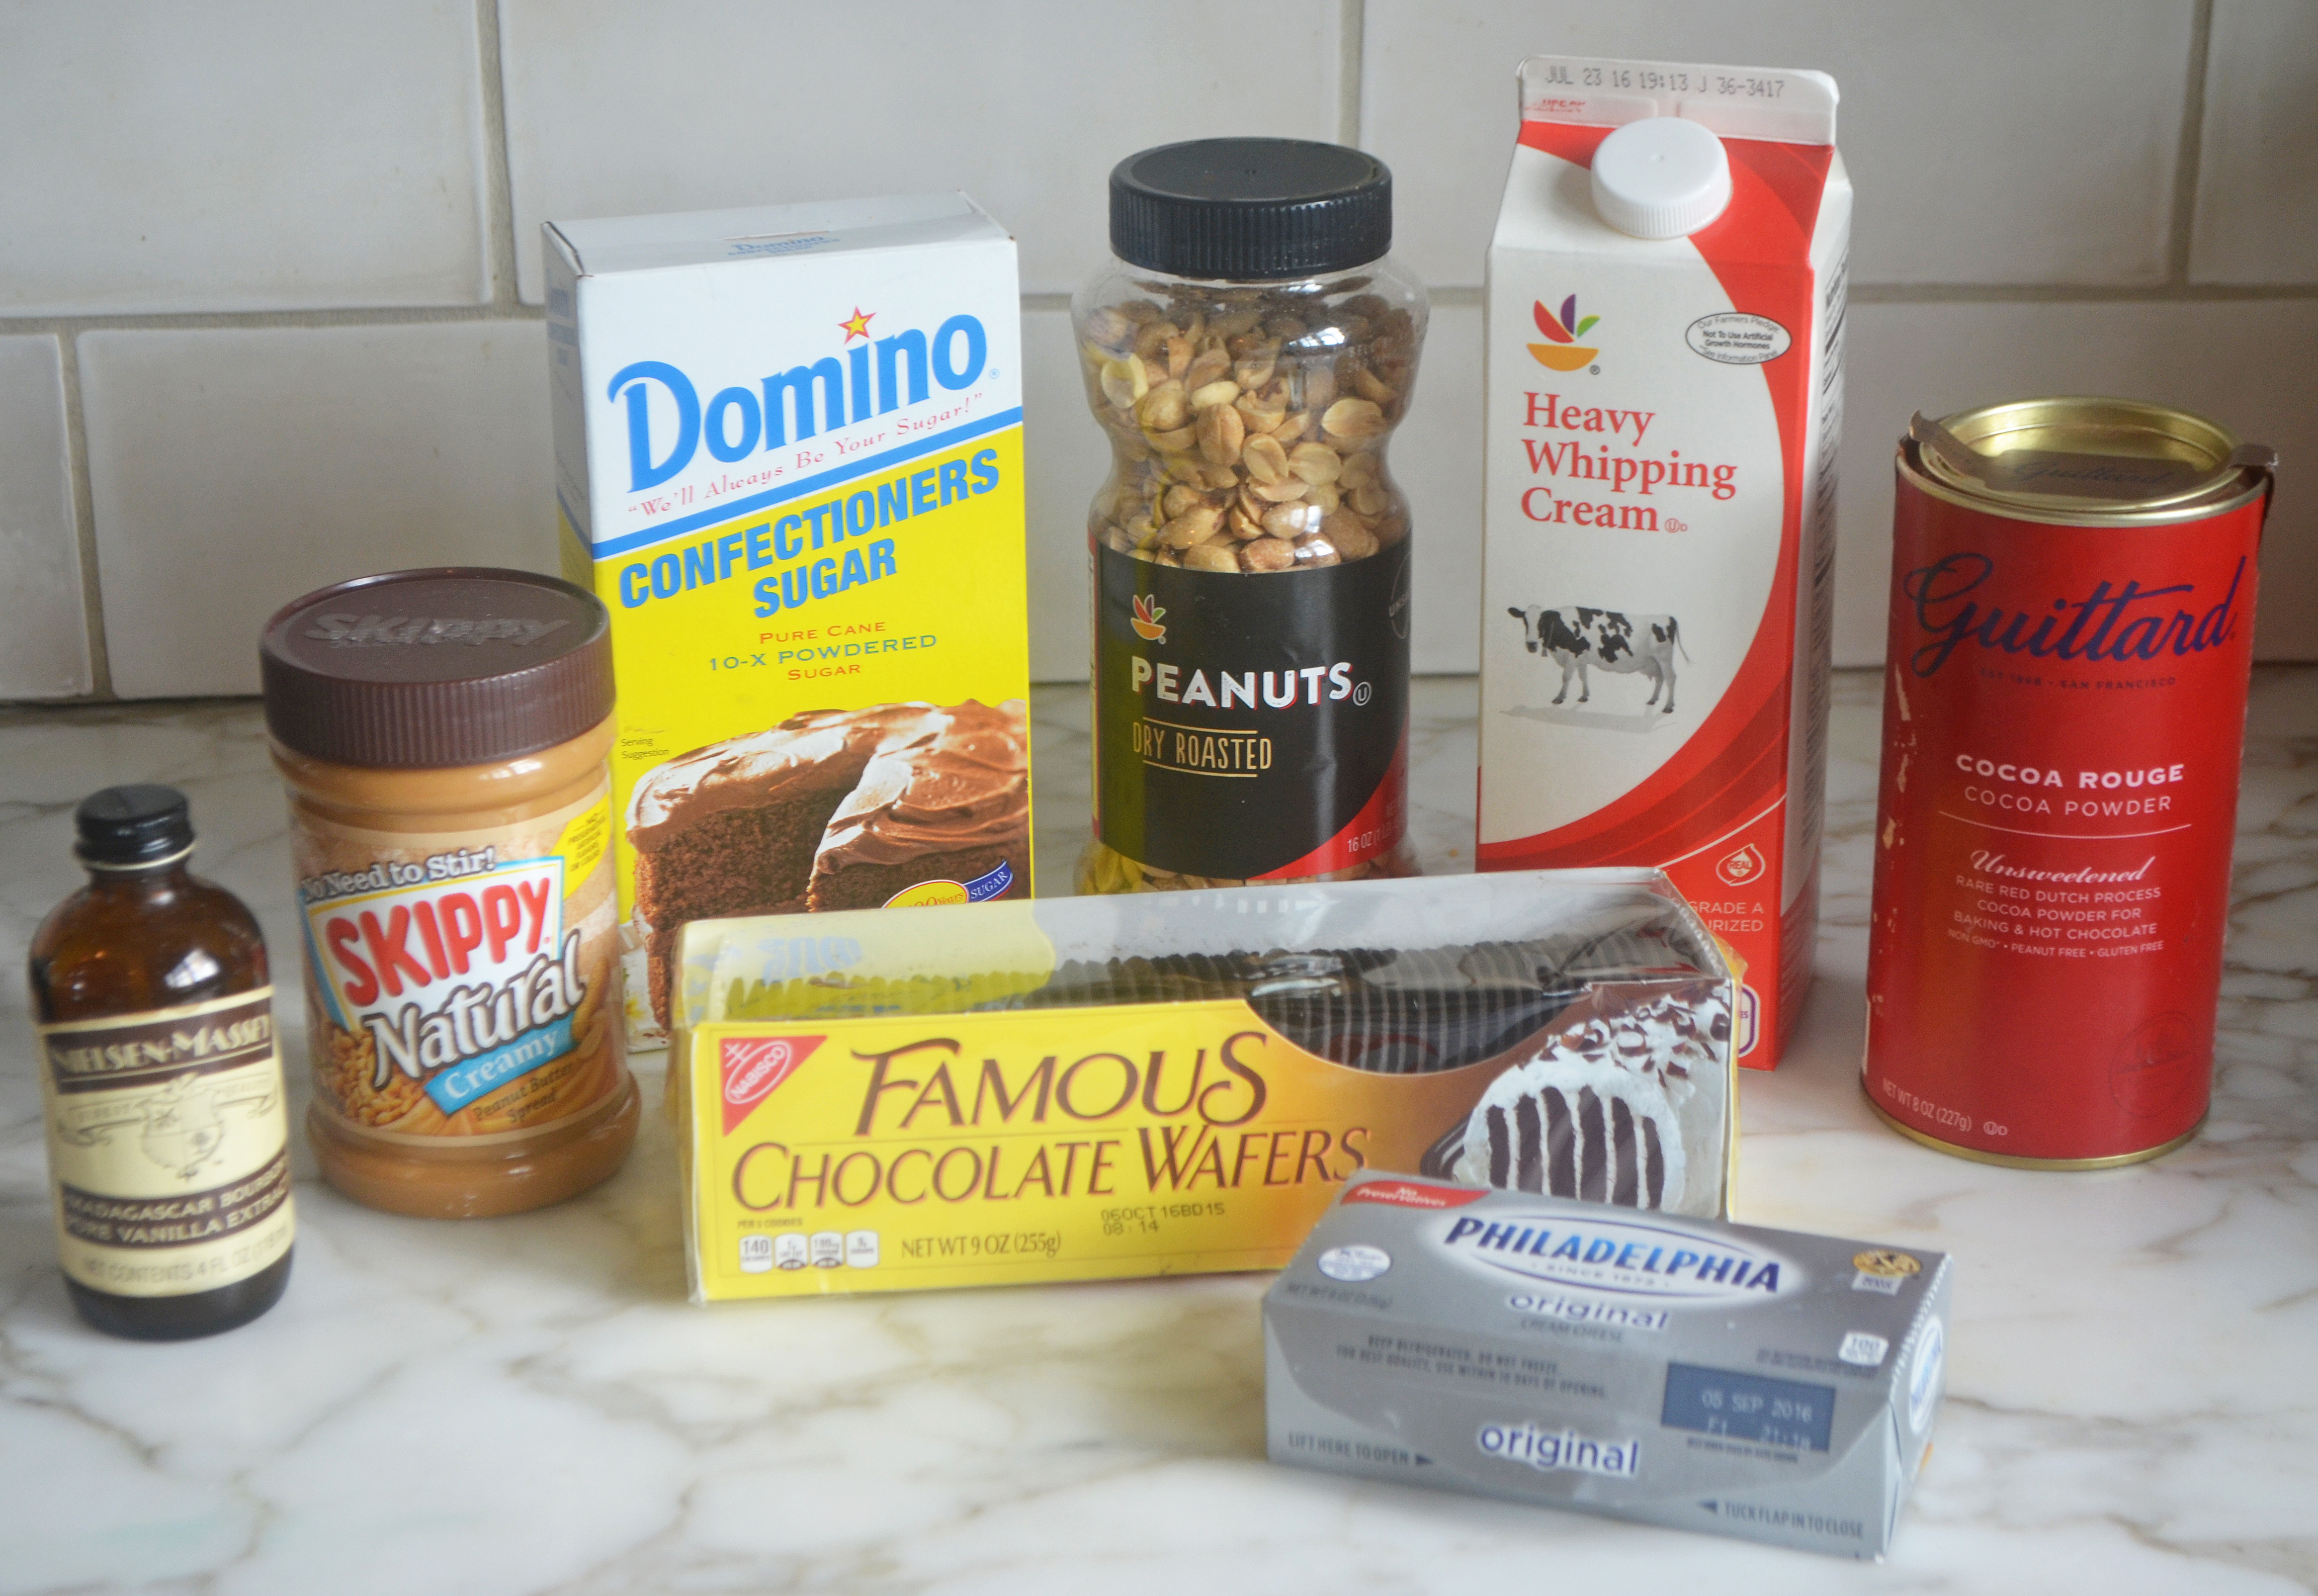 Cake ingredients including chocolate wafers, peanut butter, and peanuts.